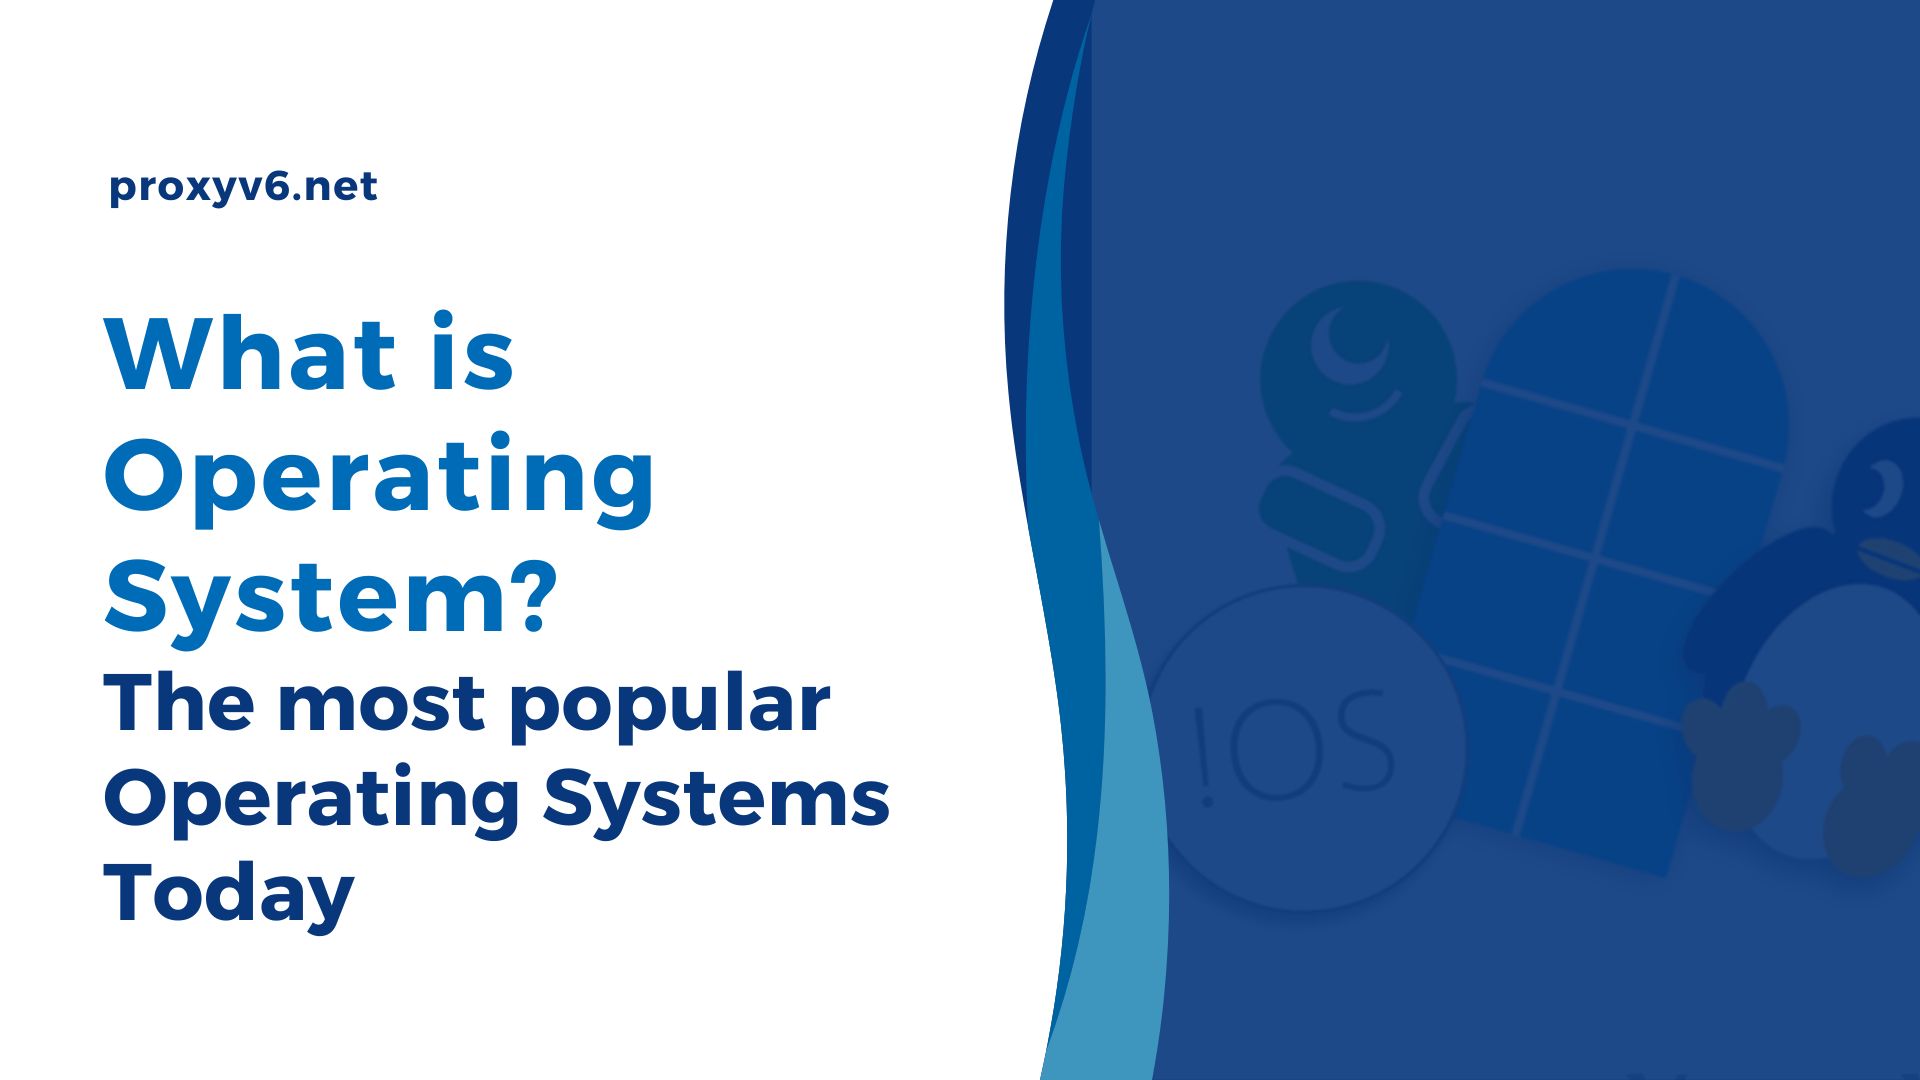 What is the operating system? The Most operating systems today